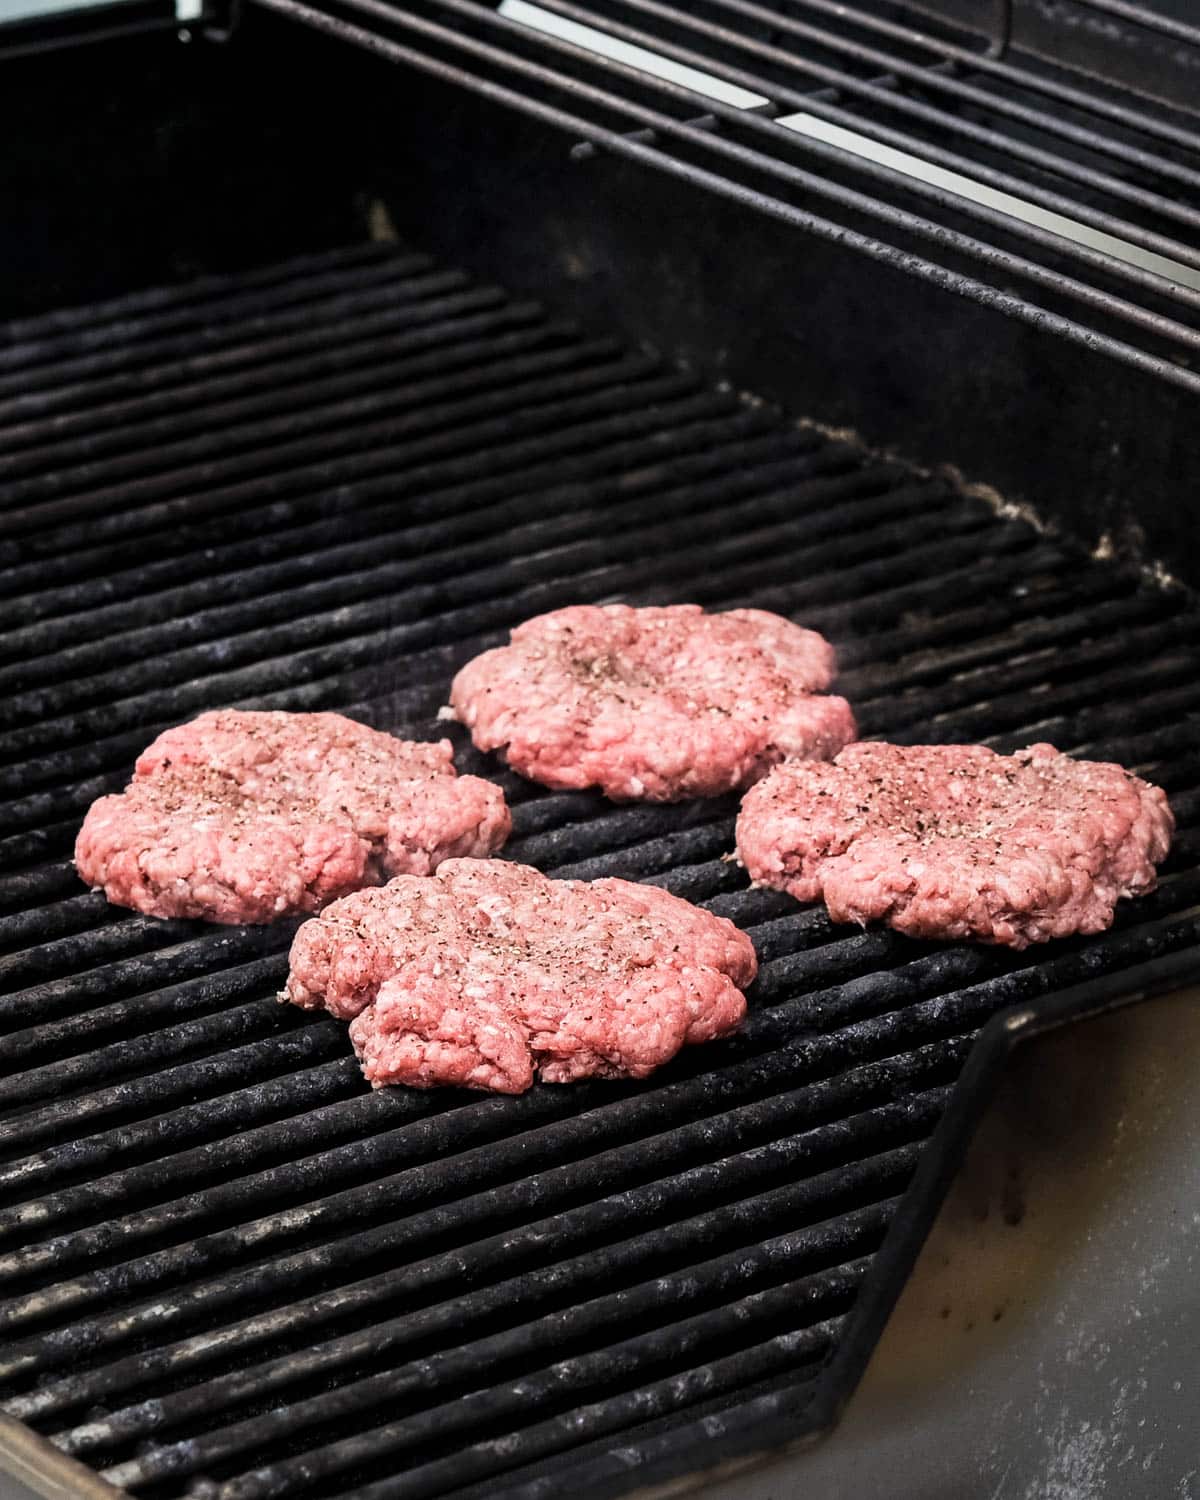 Burgers on the grill to cook.